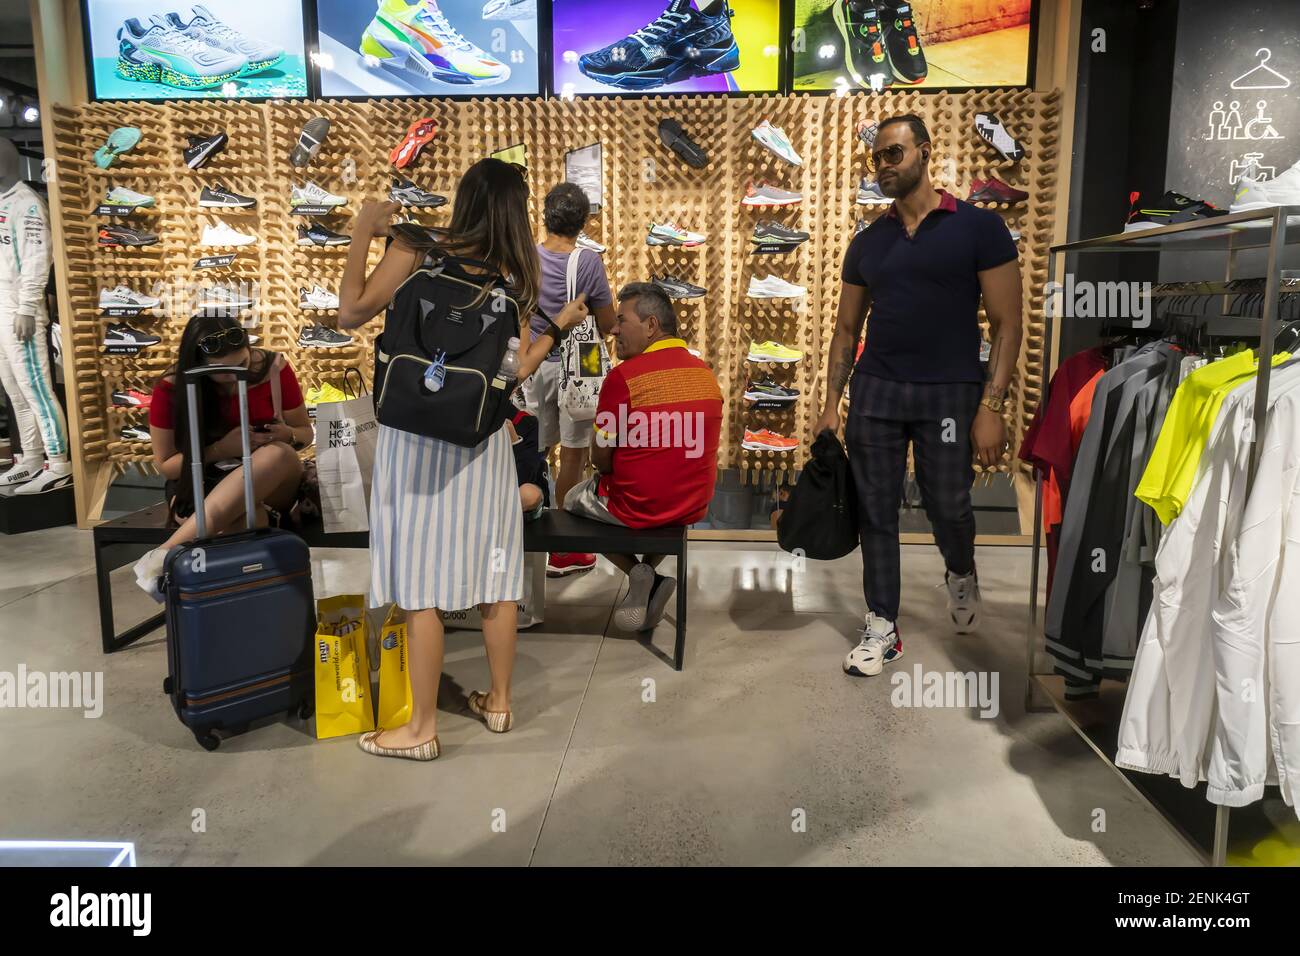 Shoppers and visitors flock to the newly opened Puma flagship store on  Fifth Avenue in New York on Thursday, August 29, 2019. The 18,000 square  foot, two level store is Pumaâ€™s first